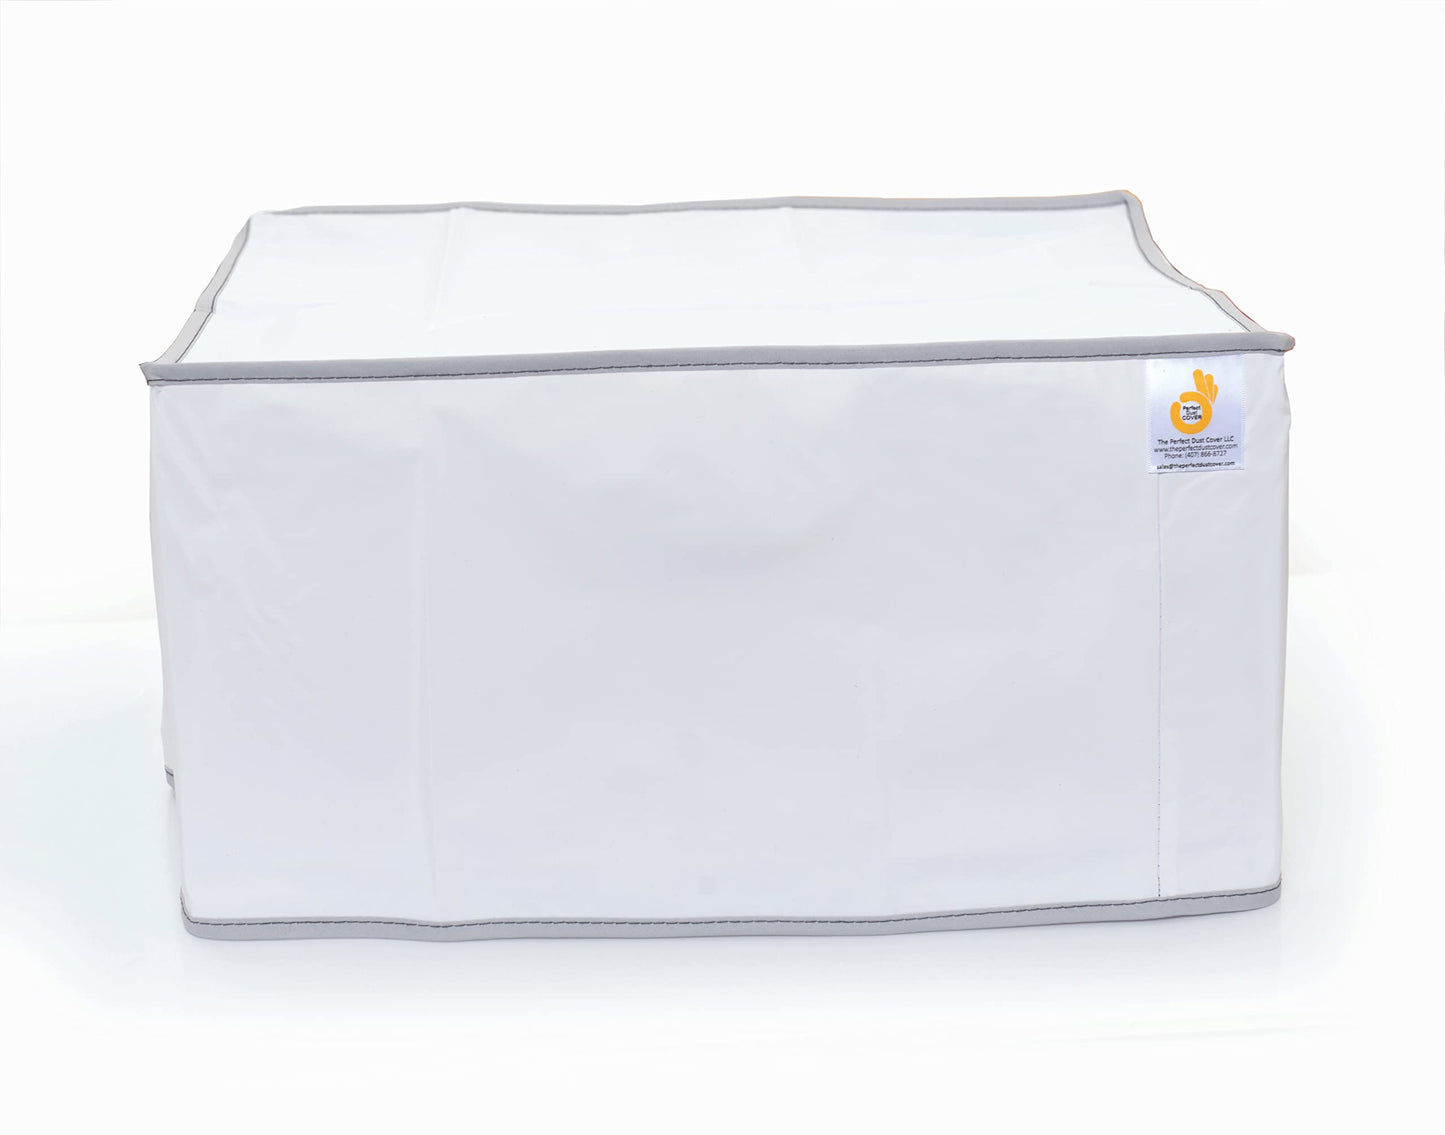 The Perfect Dust Cover, White Nylon Cover Compatible with Canon ImageCLASS MF452dw Multifunction Wireless Laser Printer, Anti Static and Waterproof Dust Cover by The Perfect Dust Cover LLC